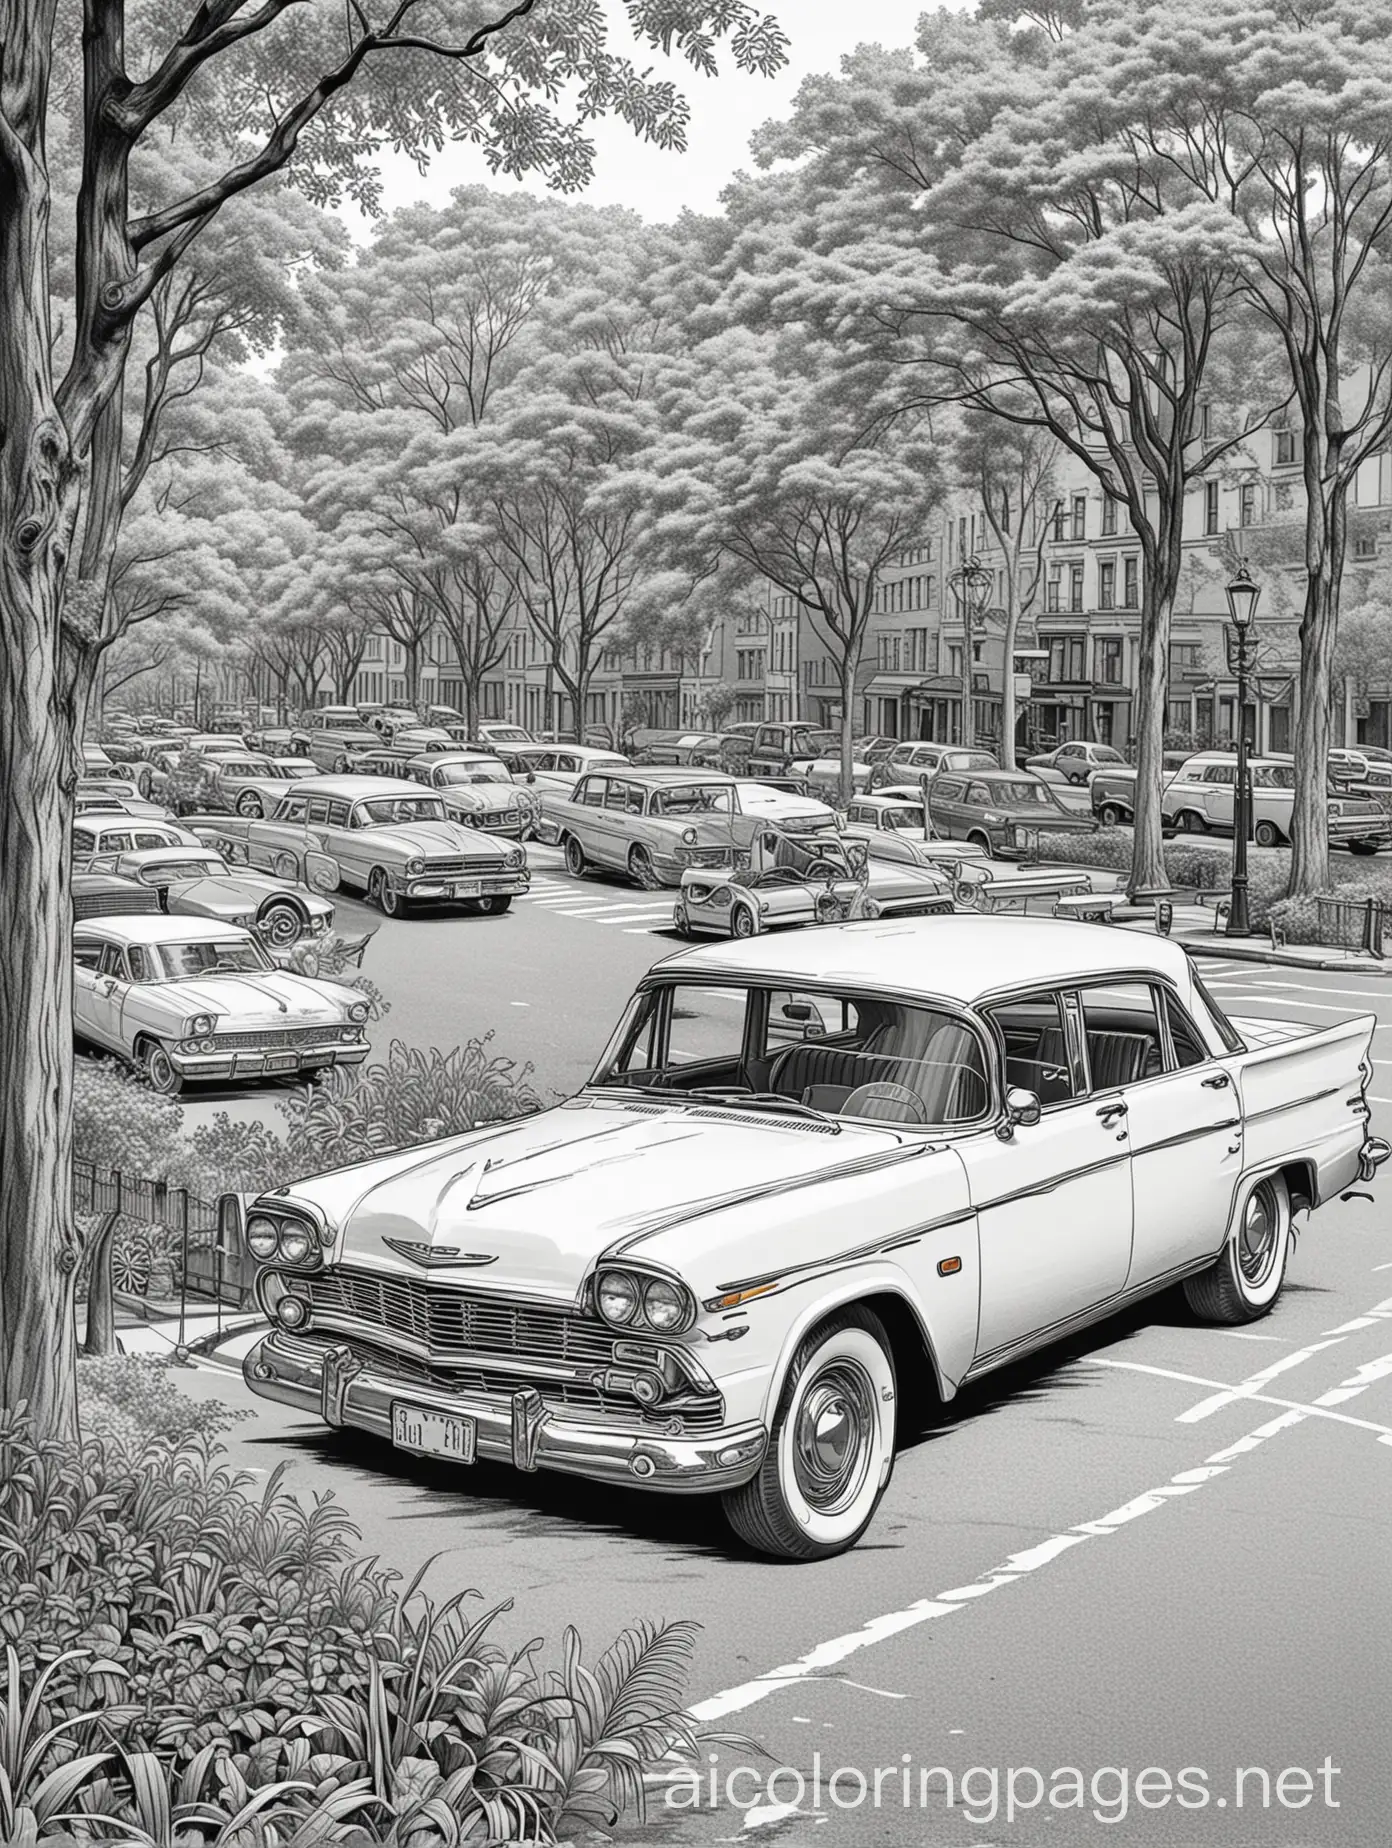 Classic-Old-Vehicles-in-Iconic-New-York-City-Park-Coloring-Page